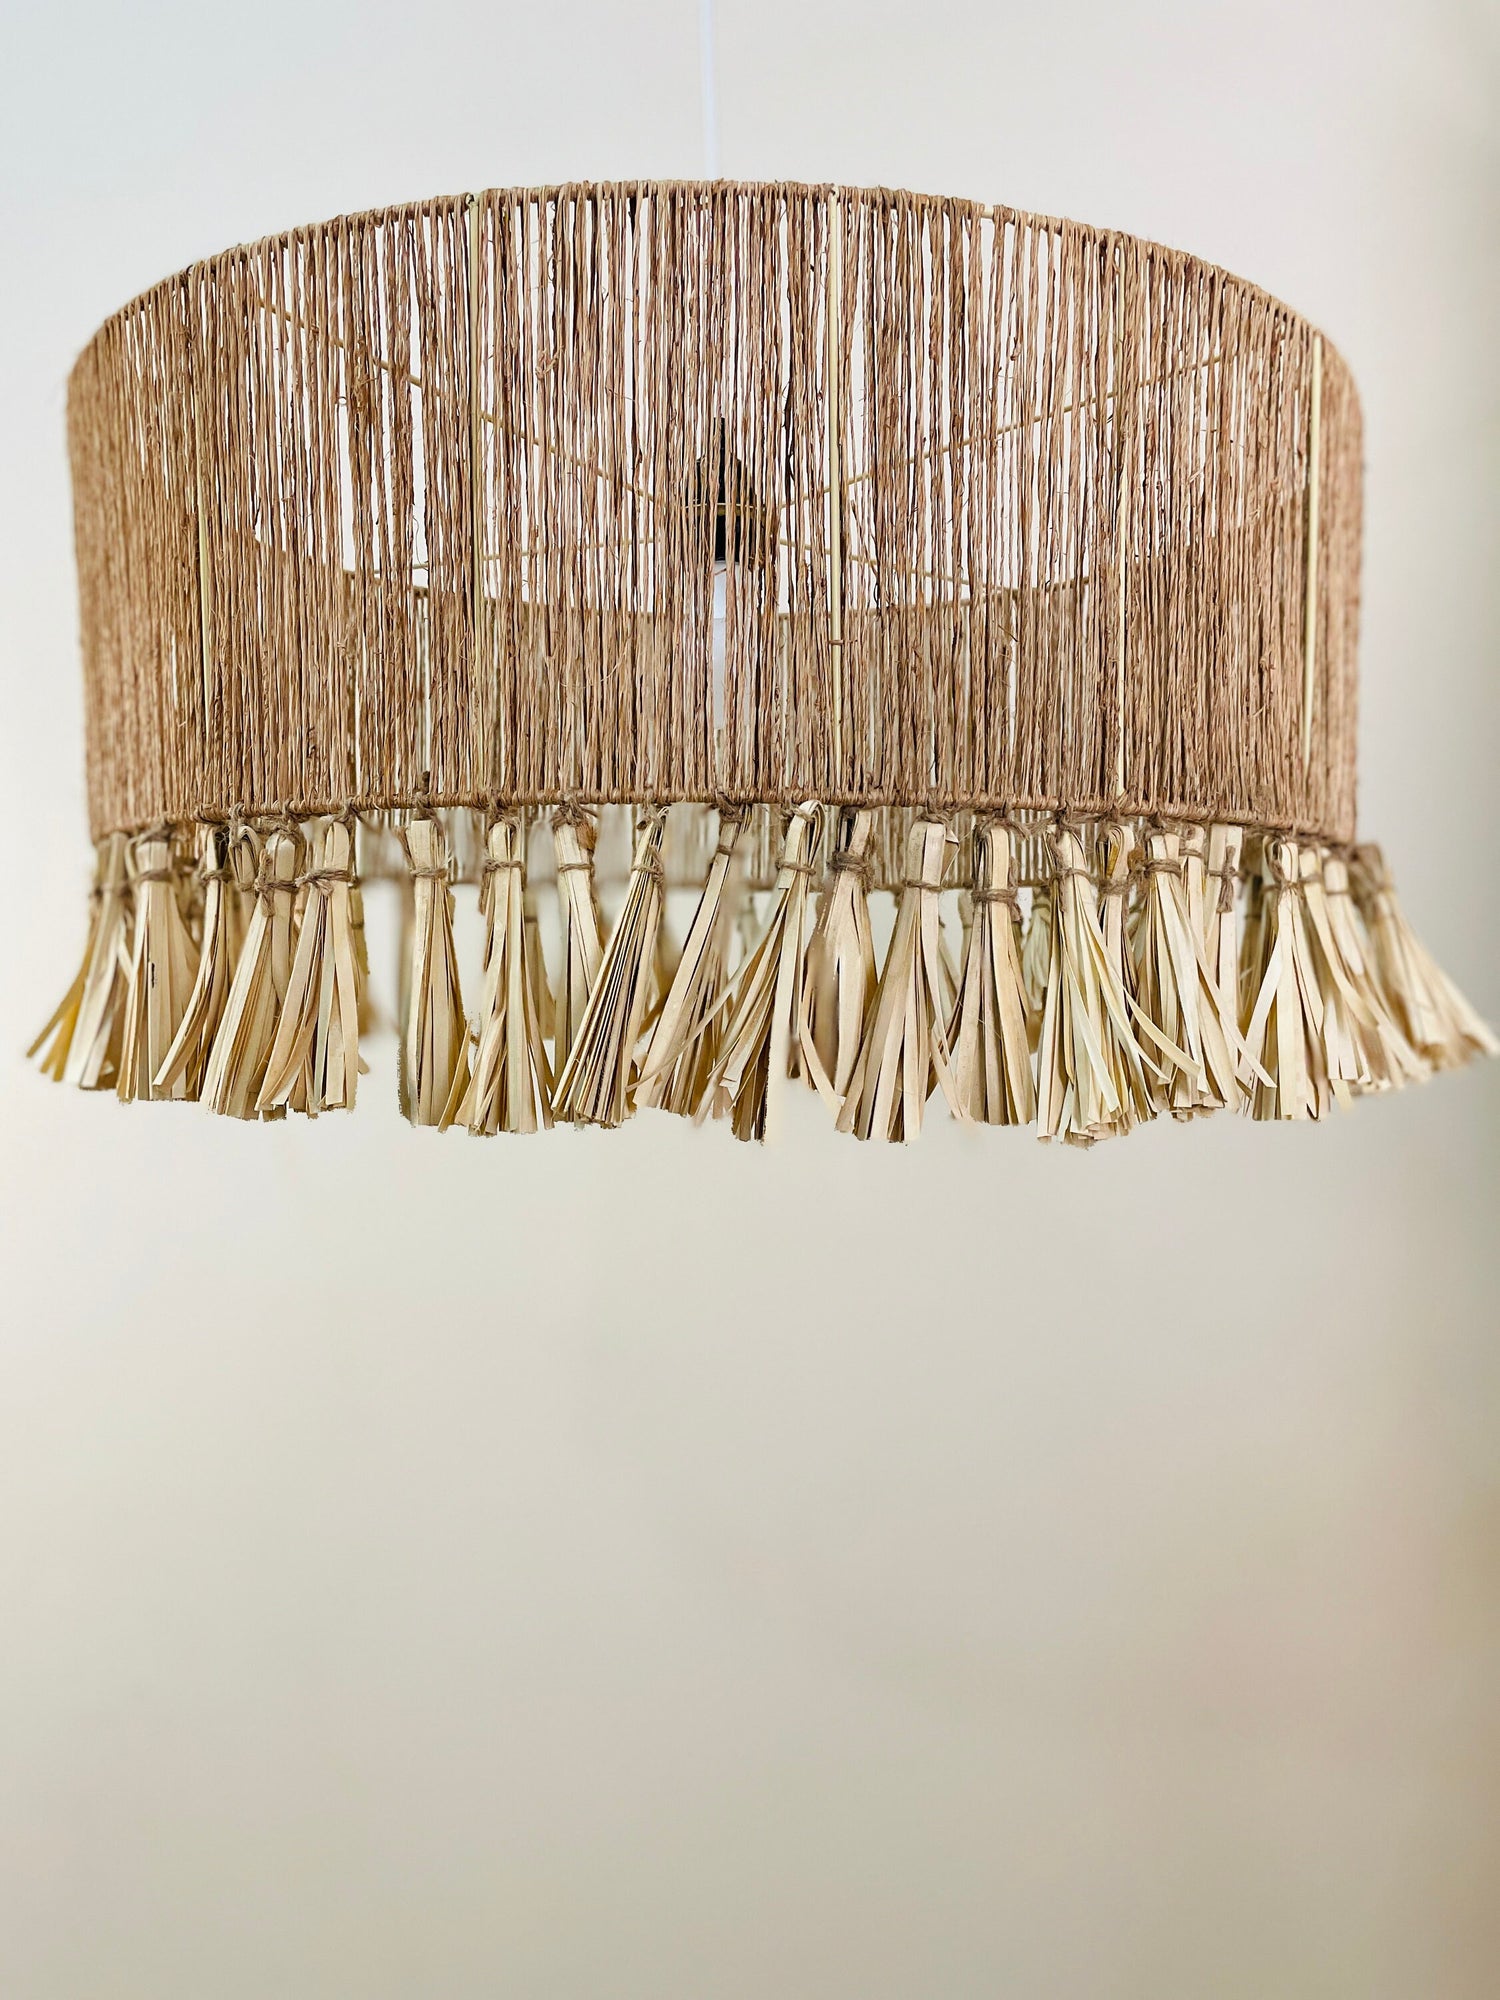 Large Round Jute Lampshade Handcrafted, Sustainable Eco Friendly Lighting, Pendant Light, Chandelier, Lampshade